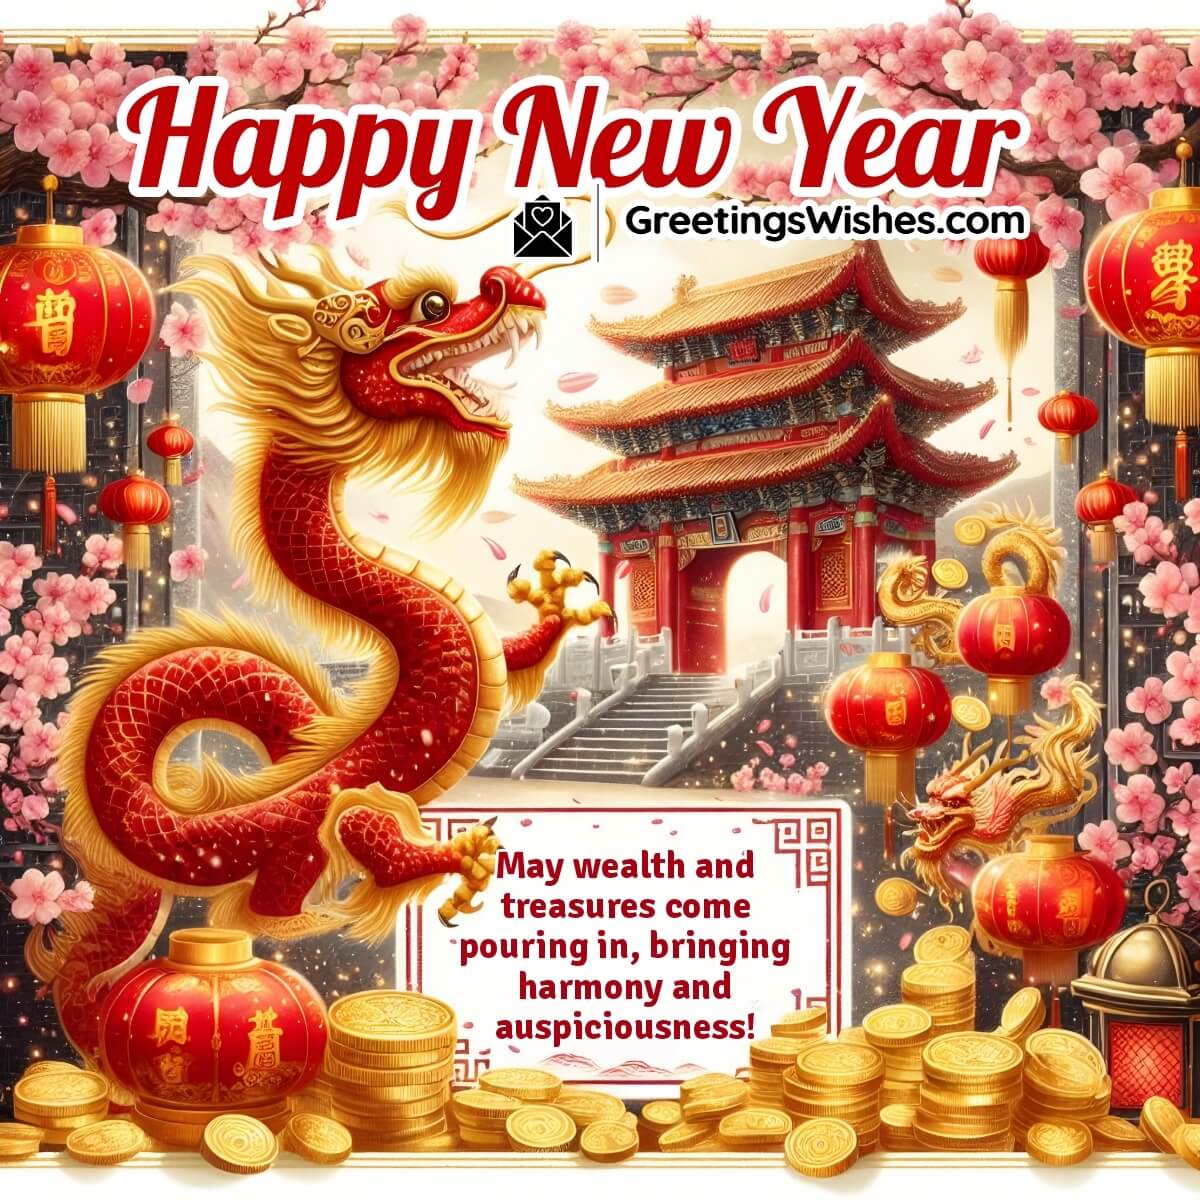 Happy Chinese New Year Greetings